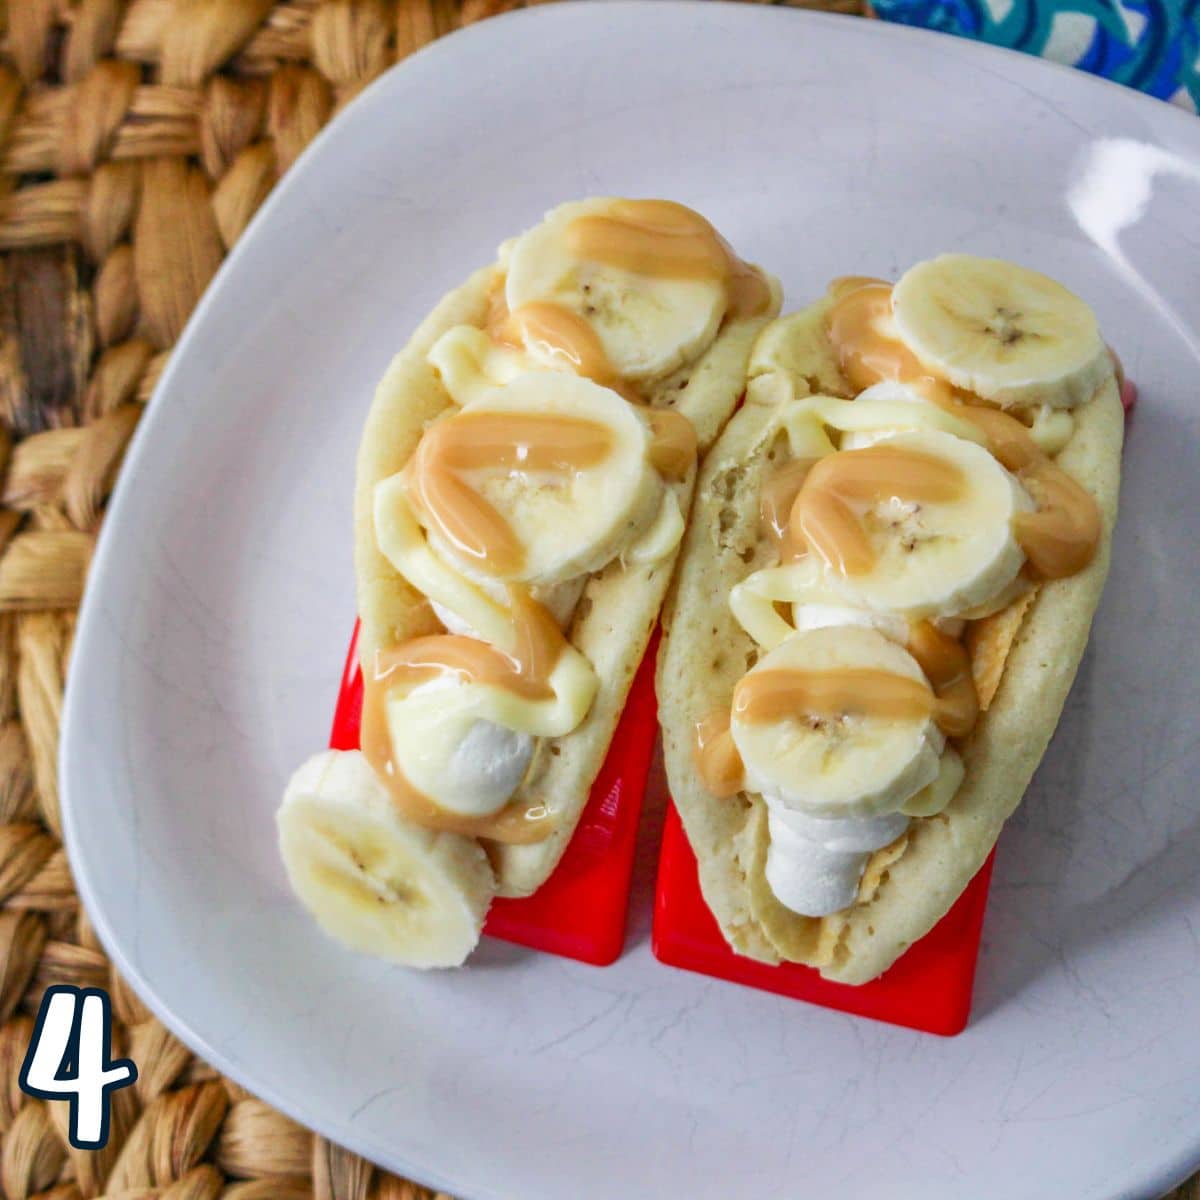 Pancake tacos filled with cheesecake mousse and sliced bananas with caramel sauce in red taco holders. 